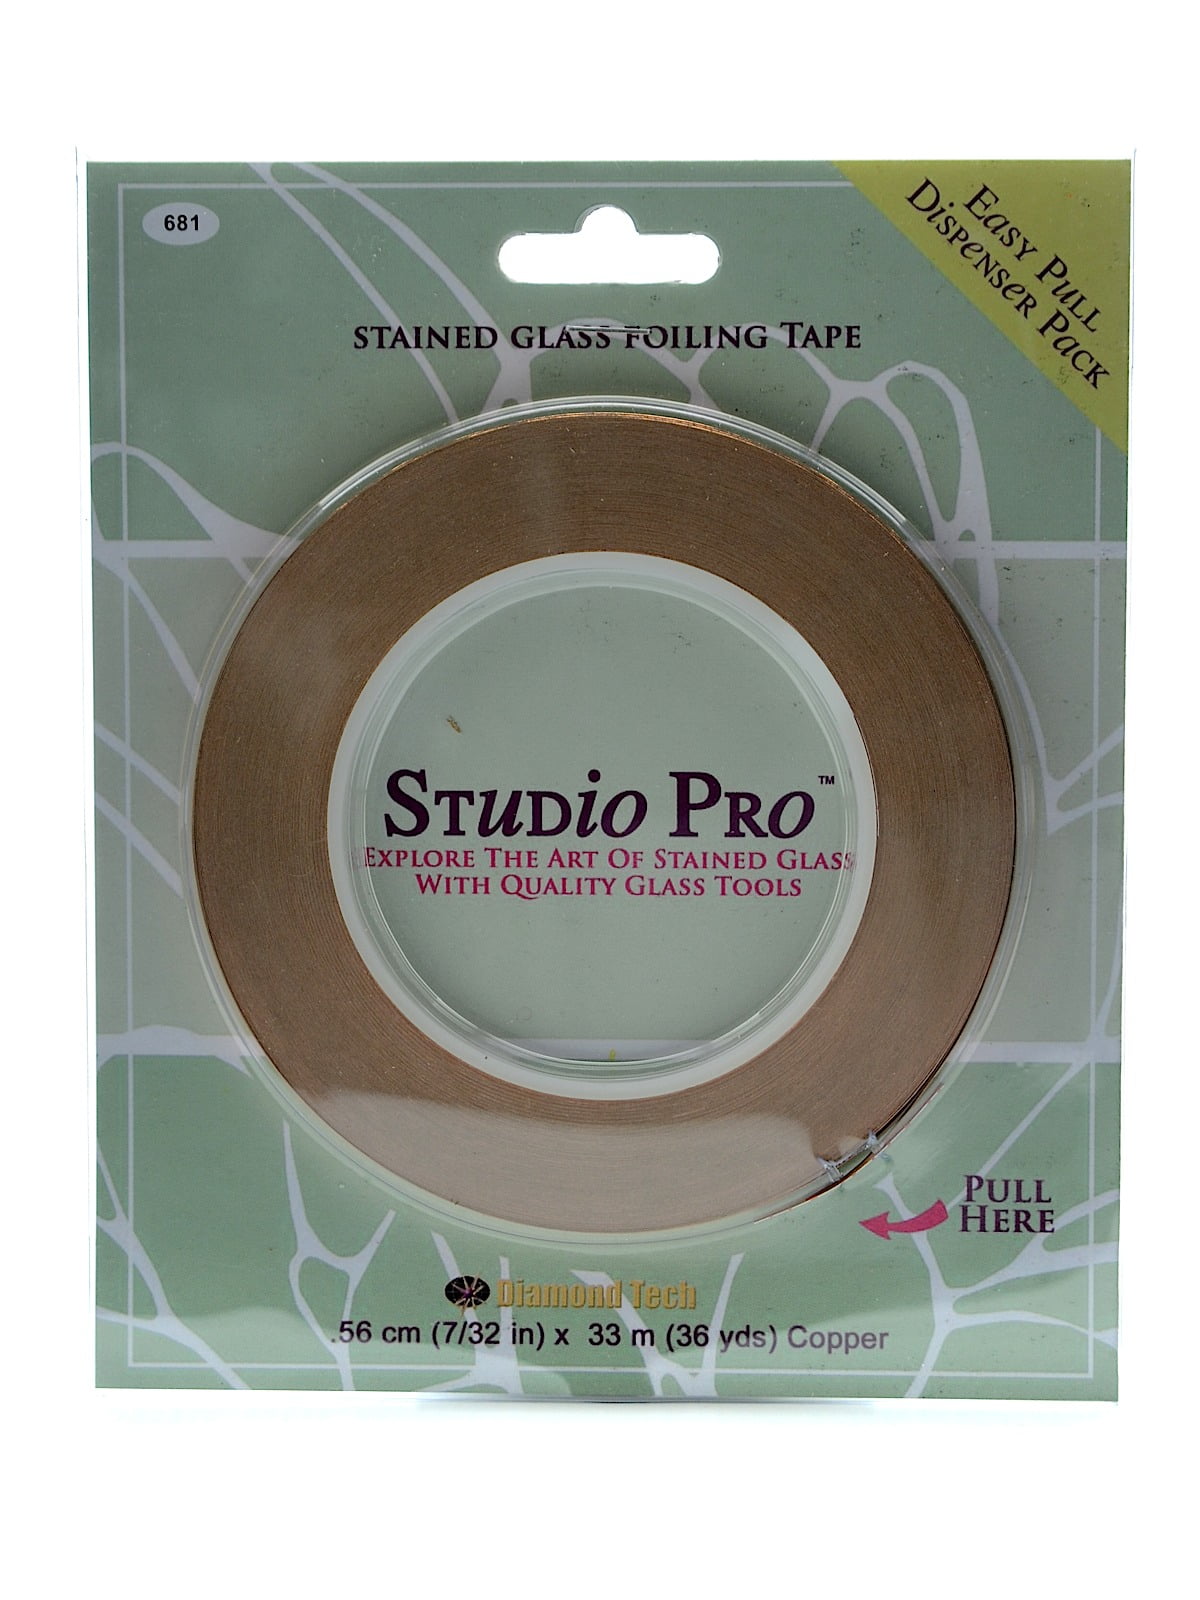 Studio Pro™ 3/8 Copper Stained Glass Foiling Tape Roll